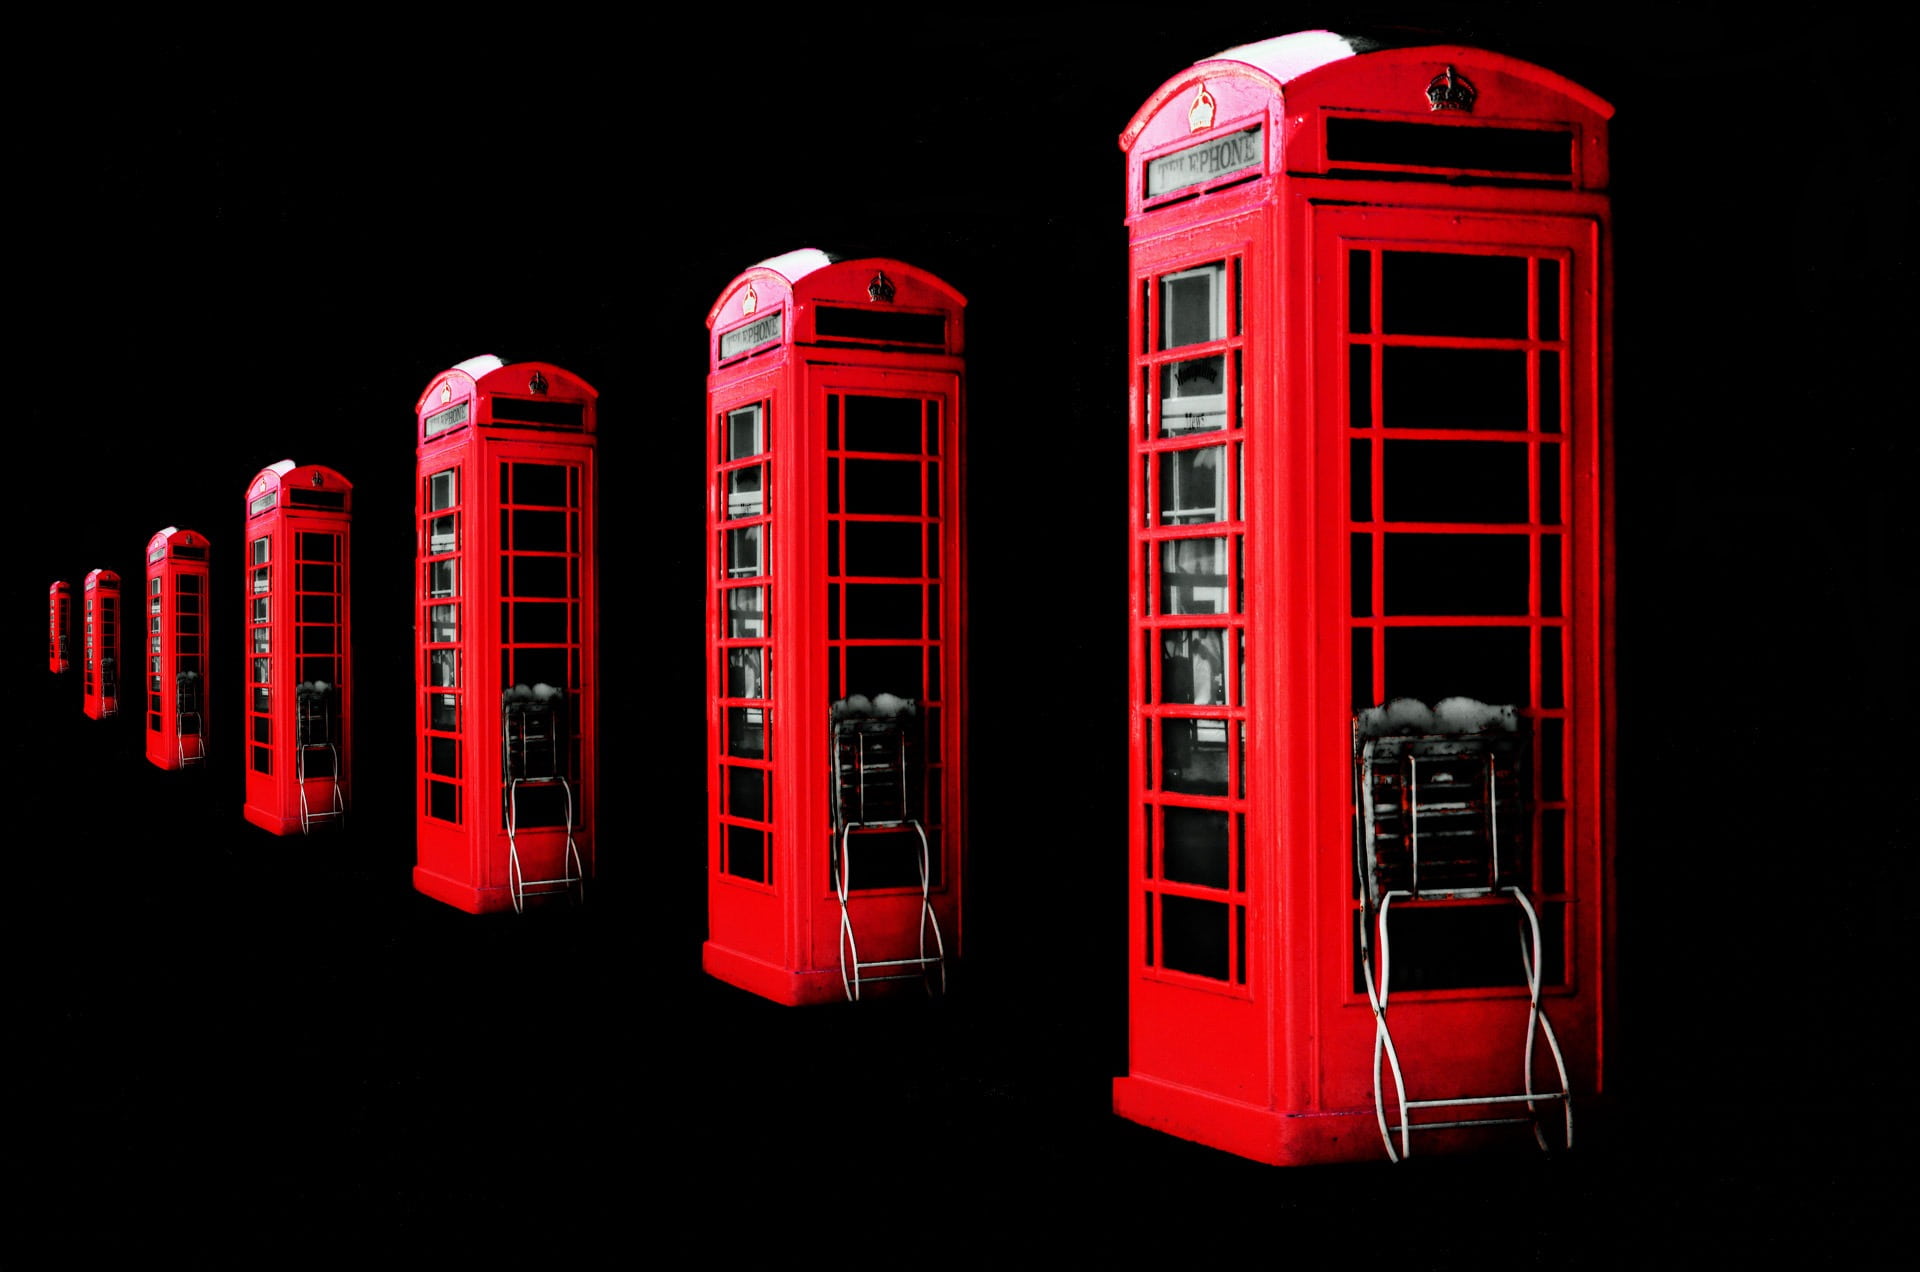 red telephone booth on black surface, box, britain, british, call